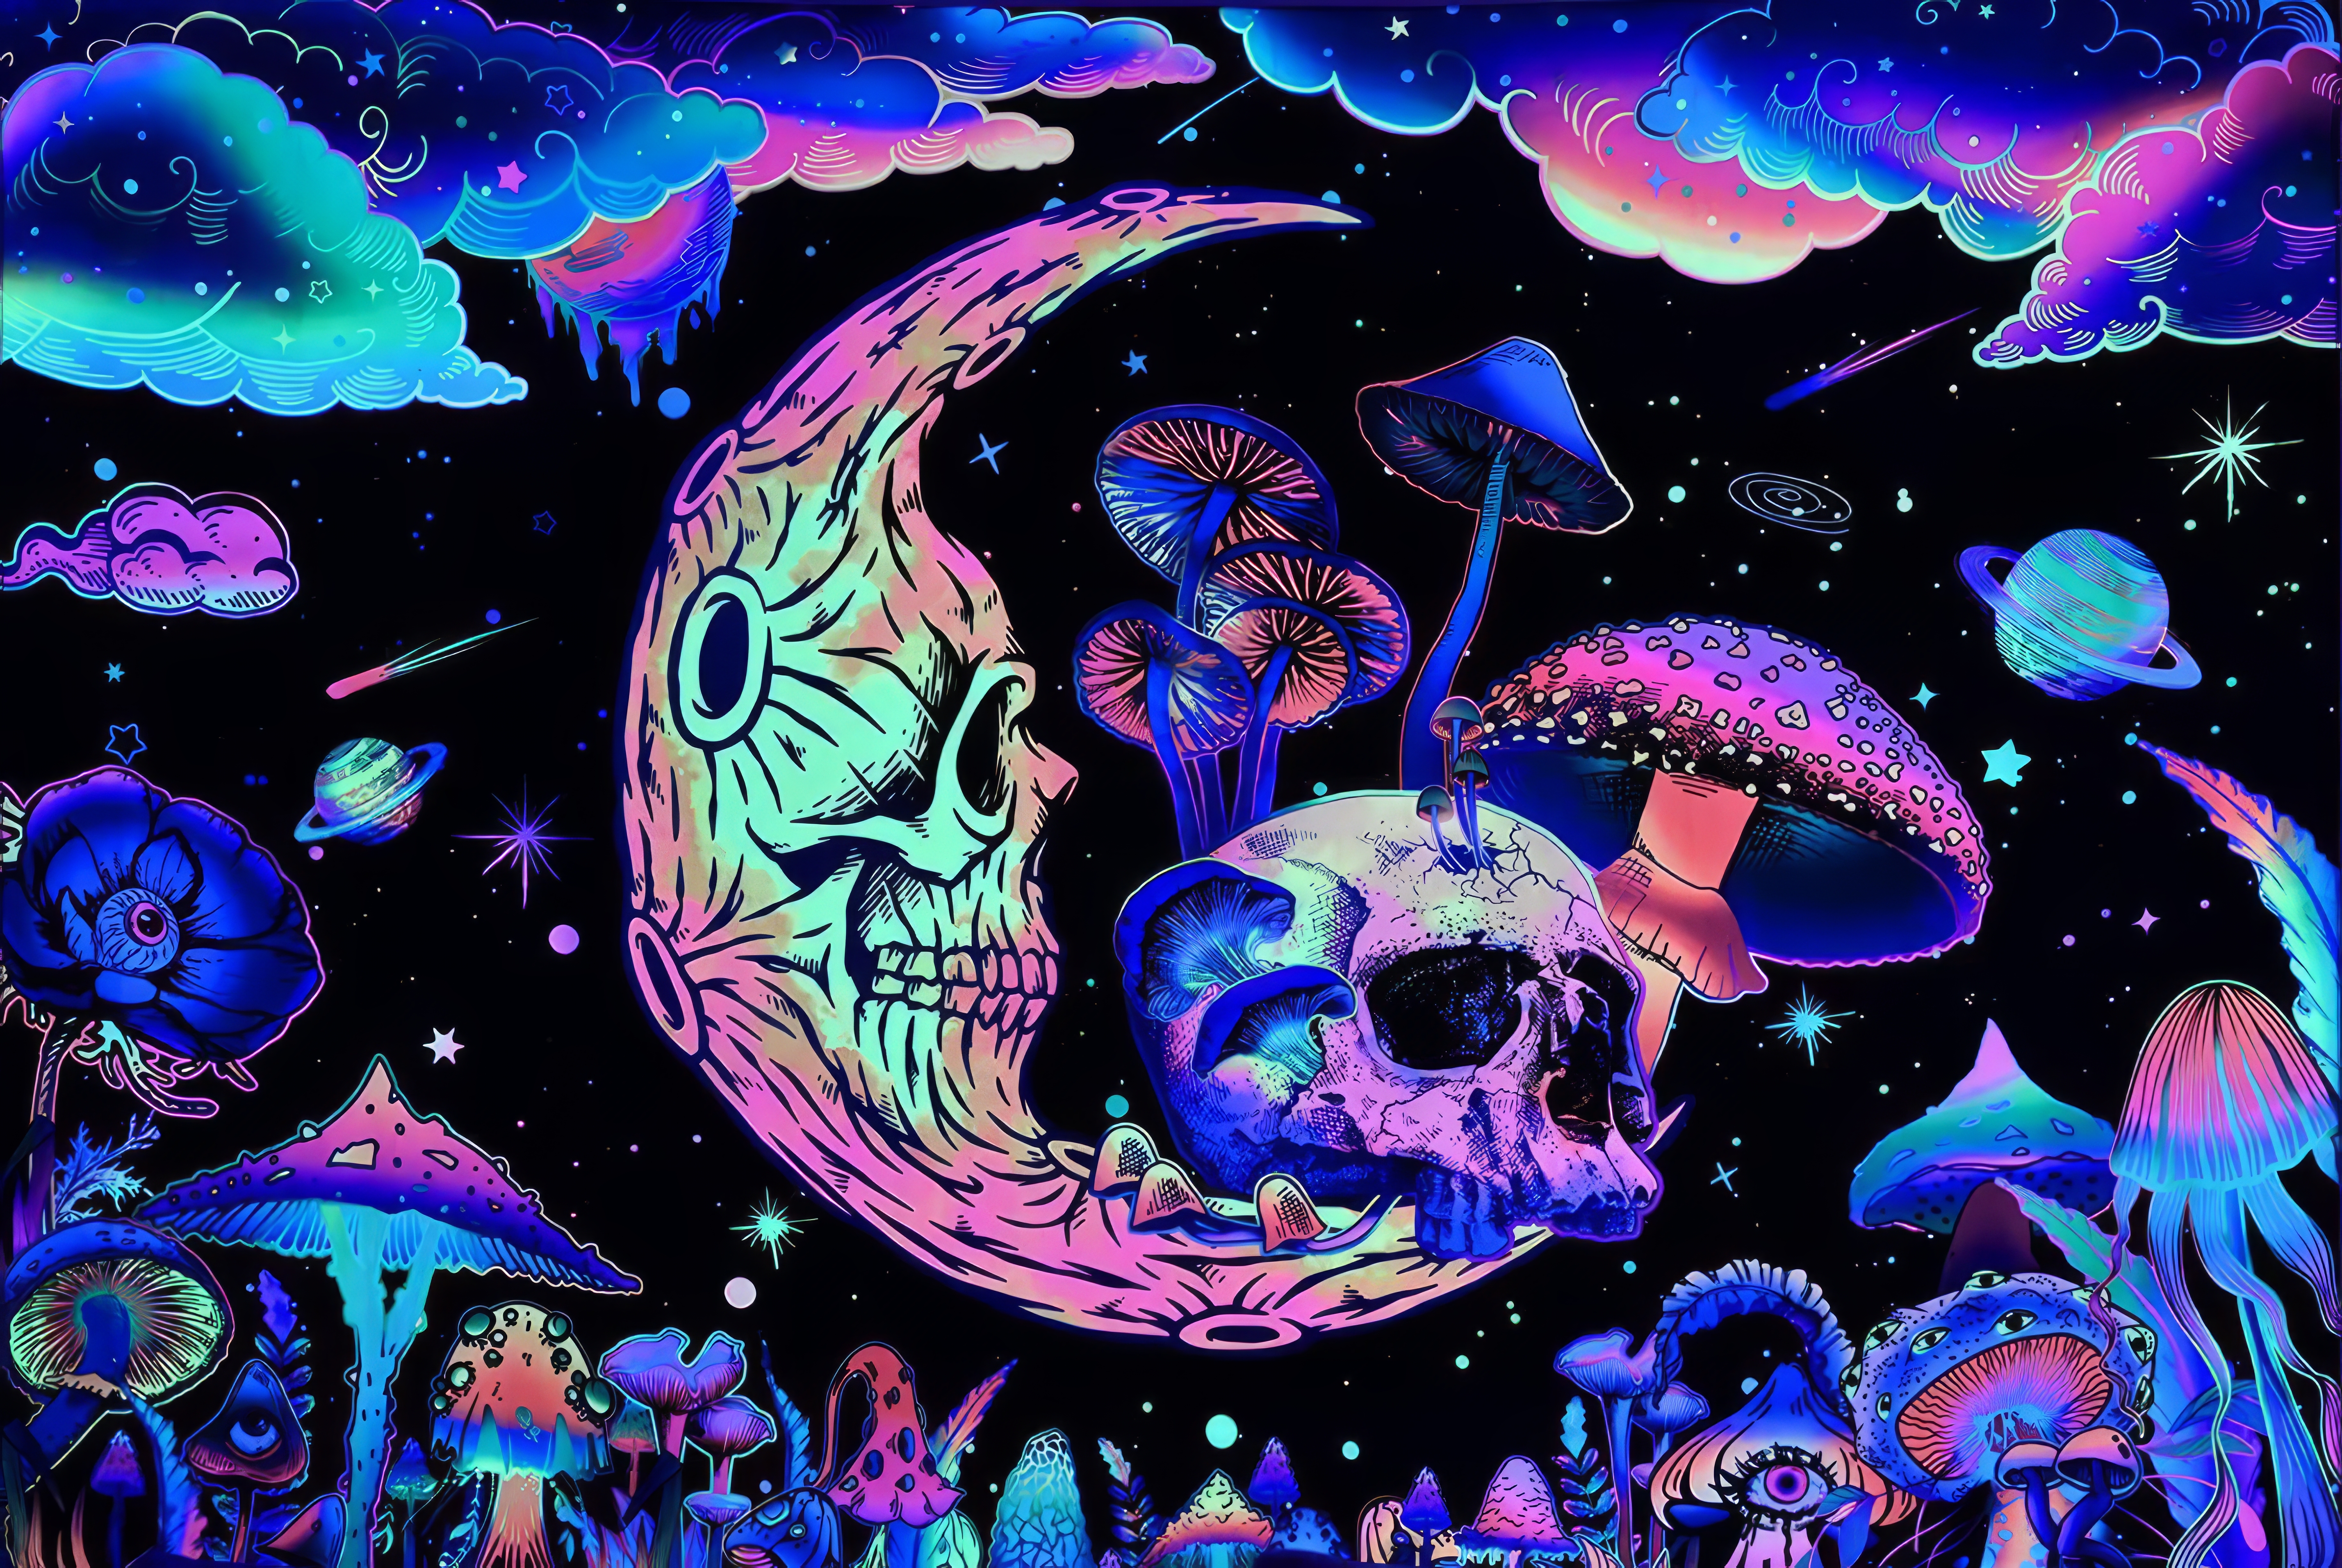 Drawn Neon Crescent Moon Skull Mushroom Colorful Psychedelic Galaxy Stars Planet Clouds 5712x3824